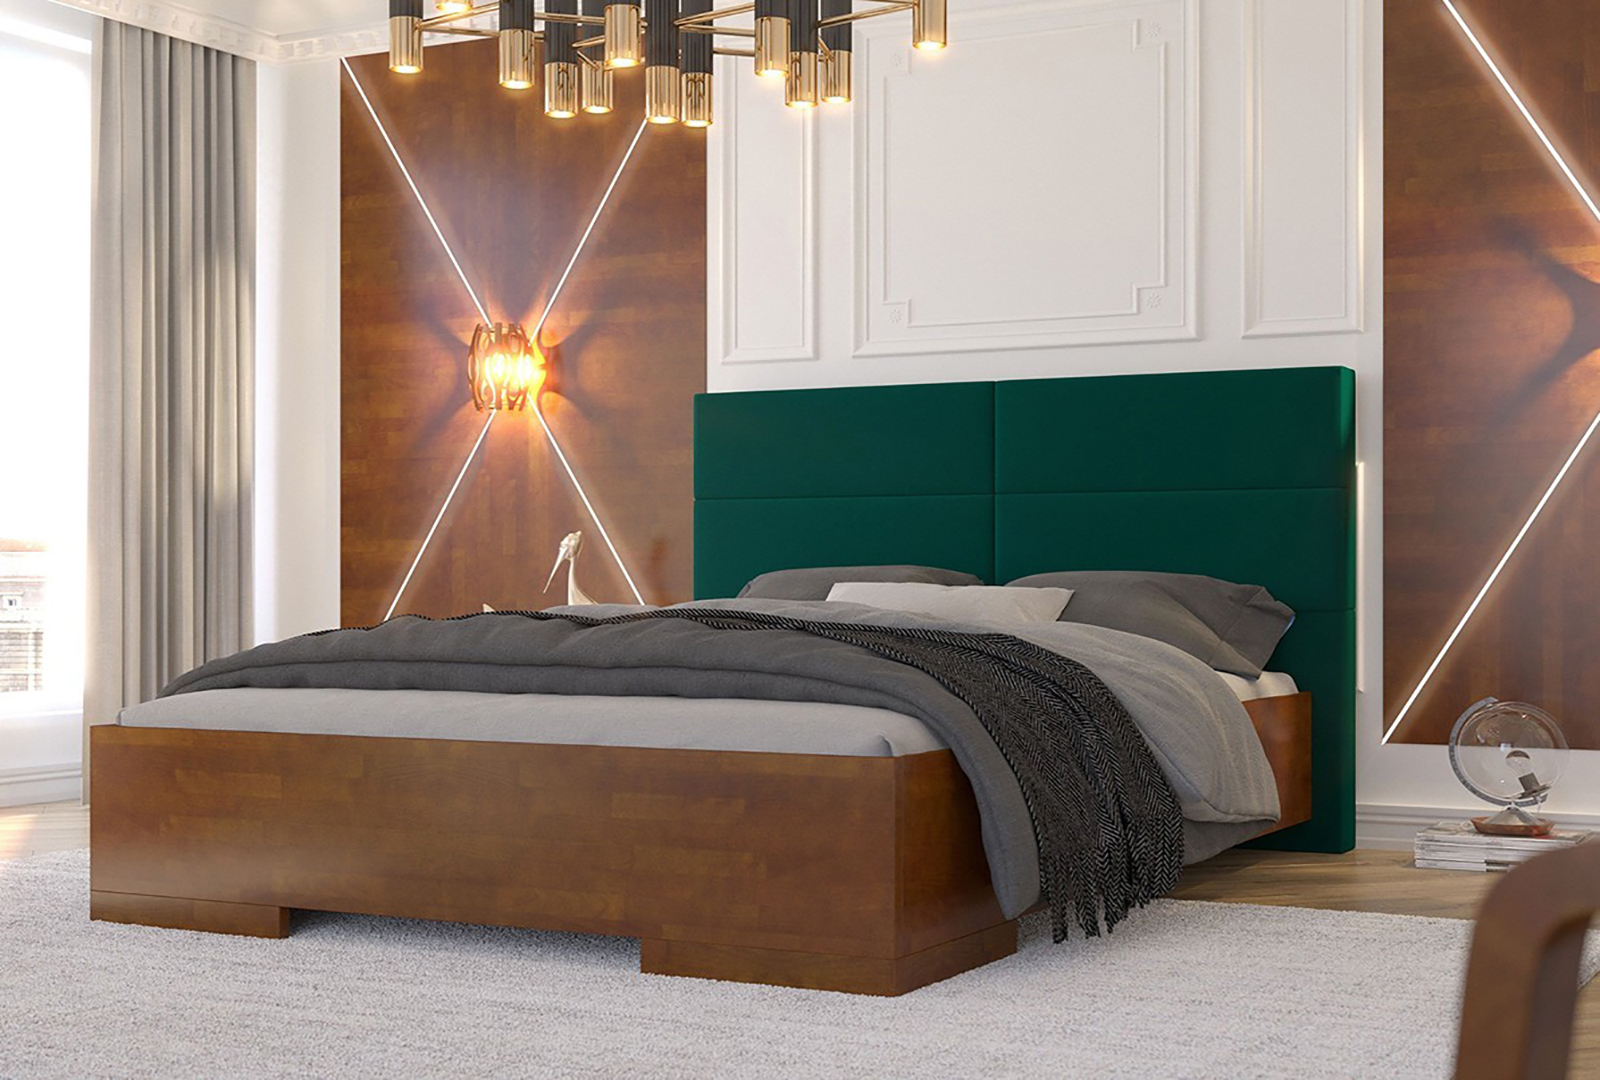 VISBY BERG WOODEN BEECH BED WITH AN UPHOLSTERED HEADBOARD 4